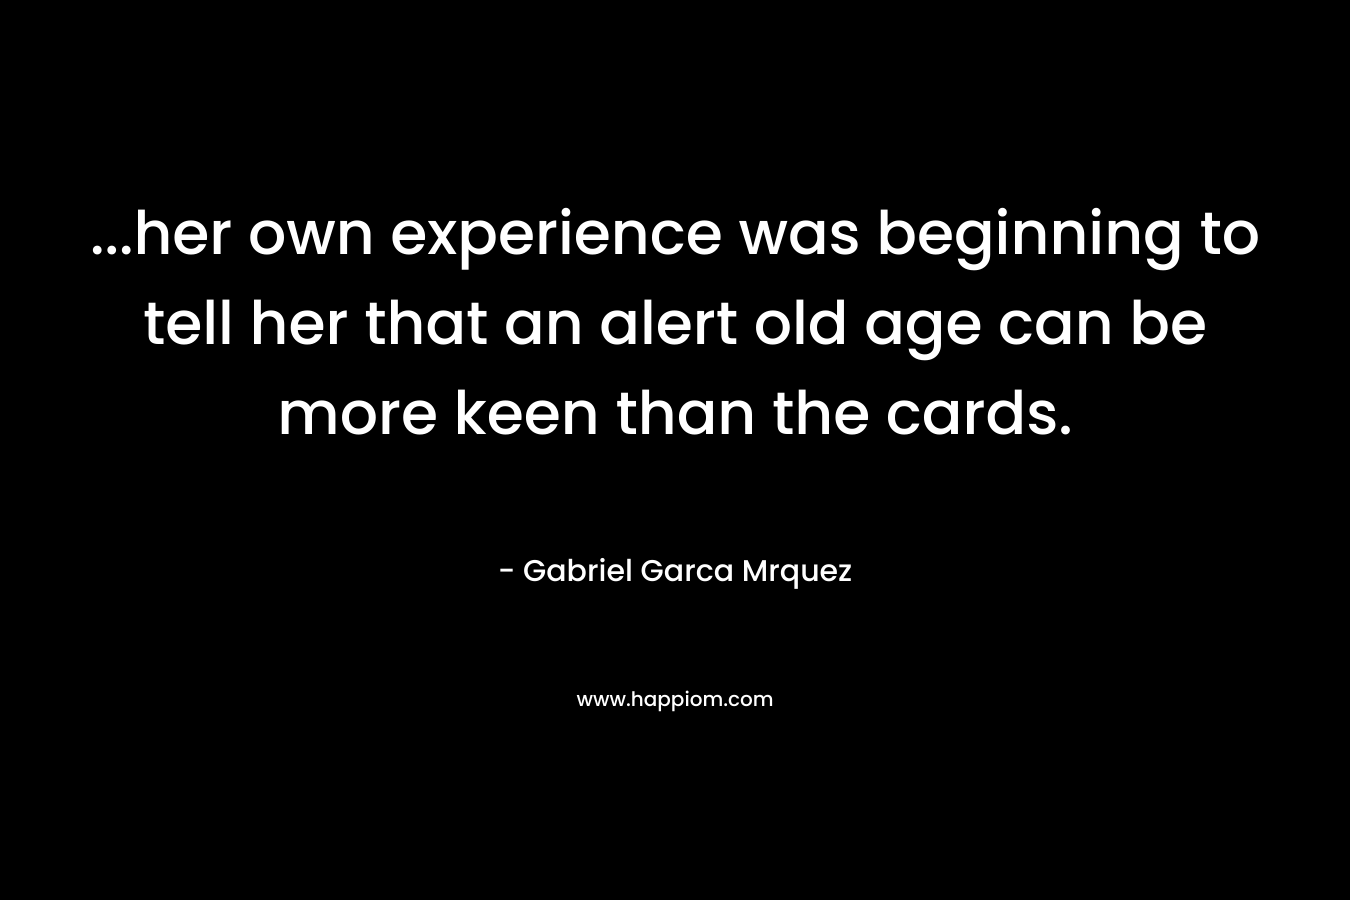 ...her own experience was beginning to tell her that an alert old age can be more keen than the cards.